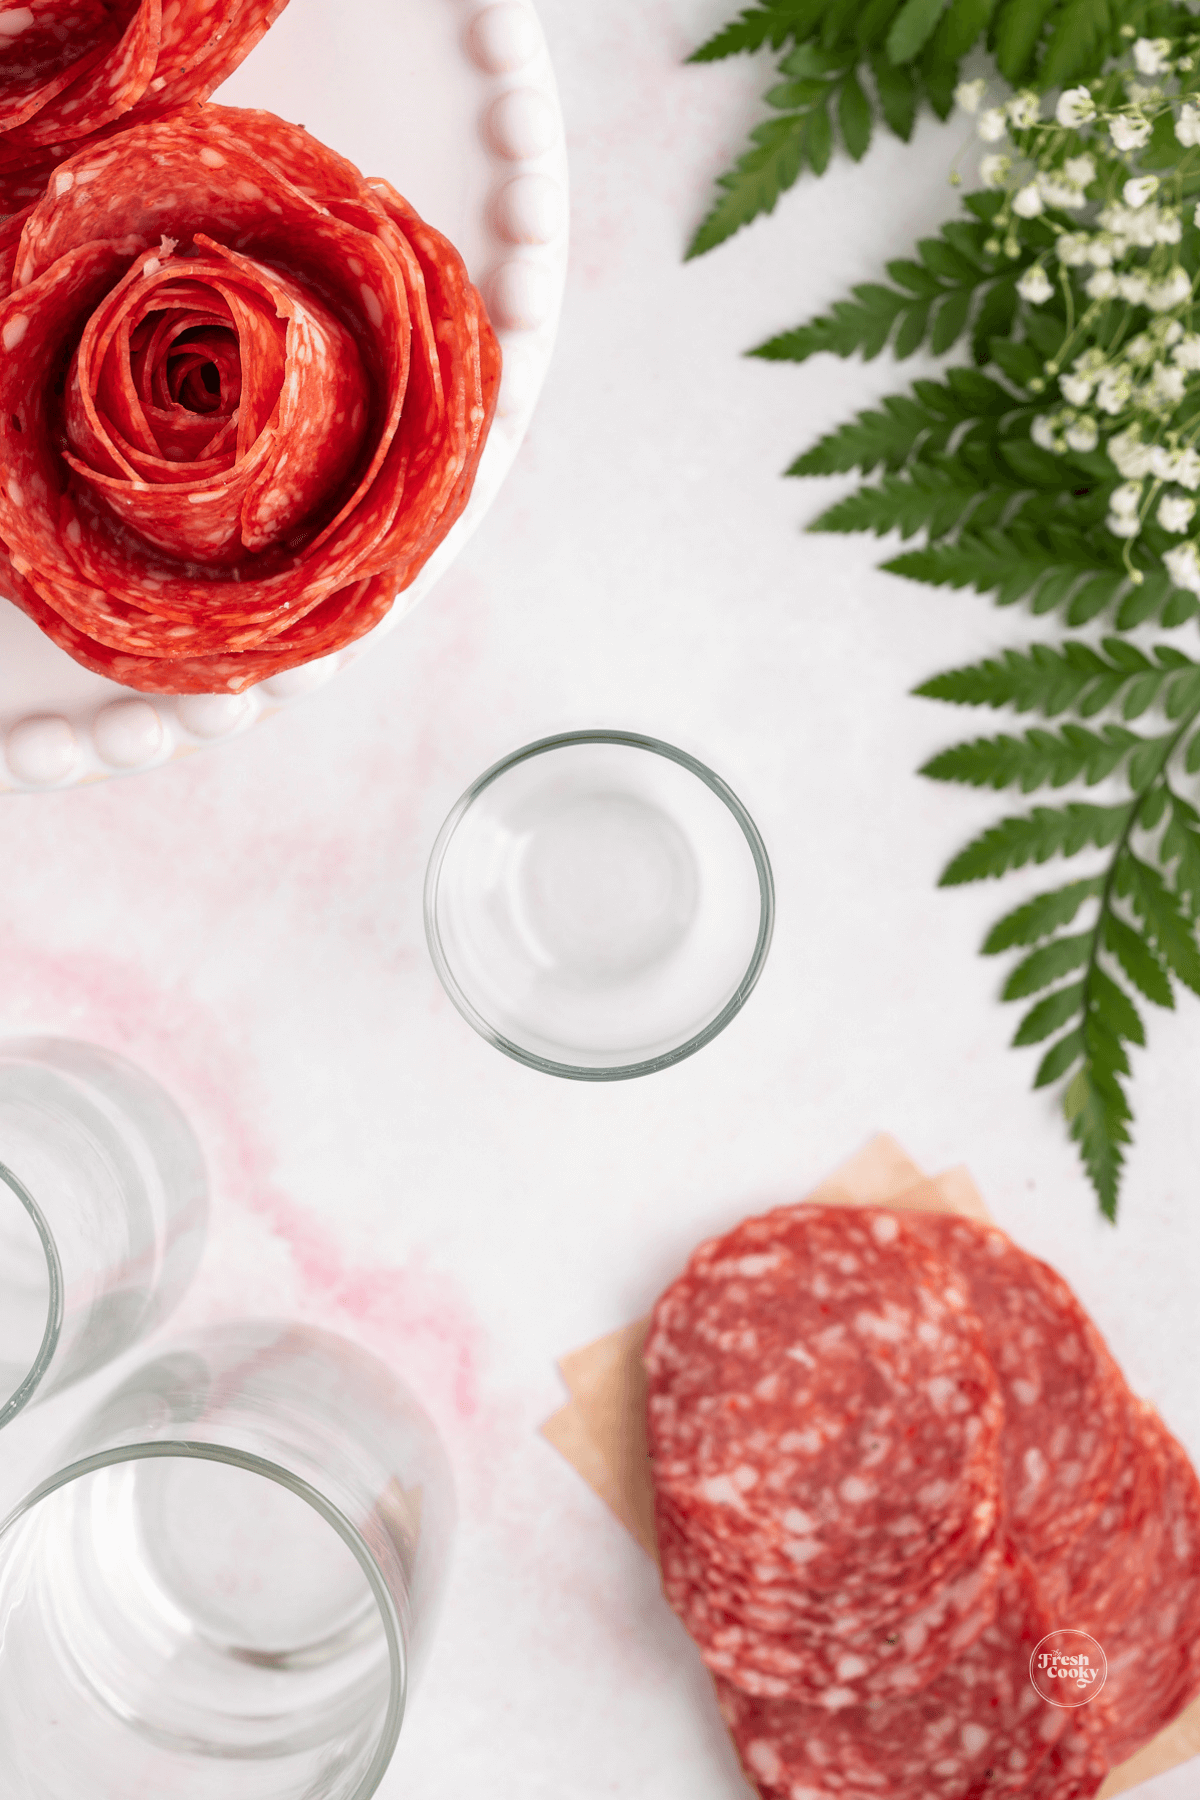 Champagne flute with salami nearby to make salami rose.